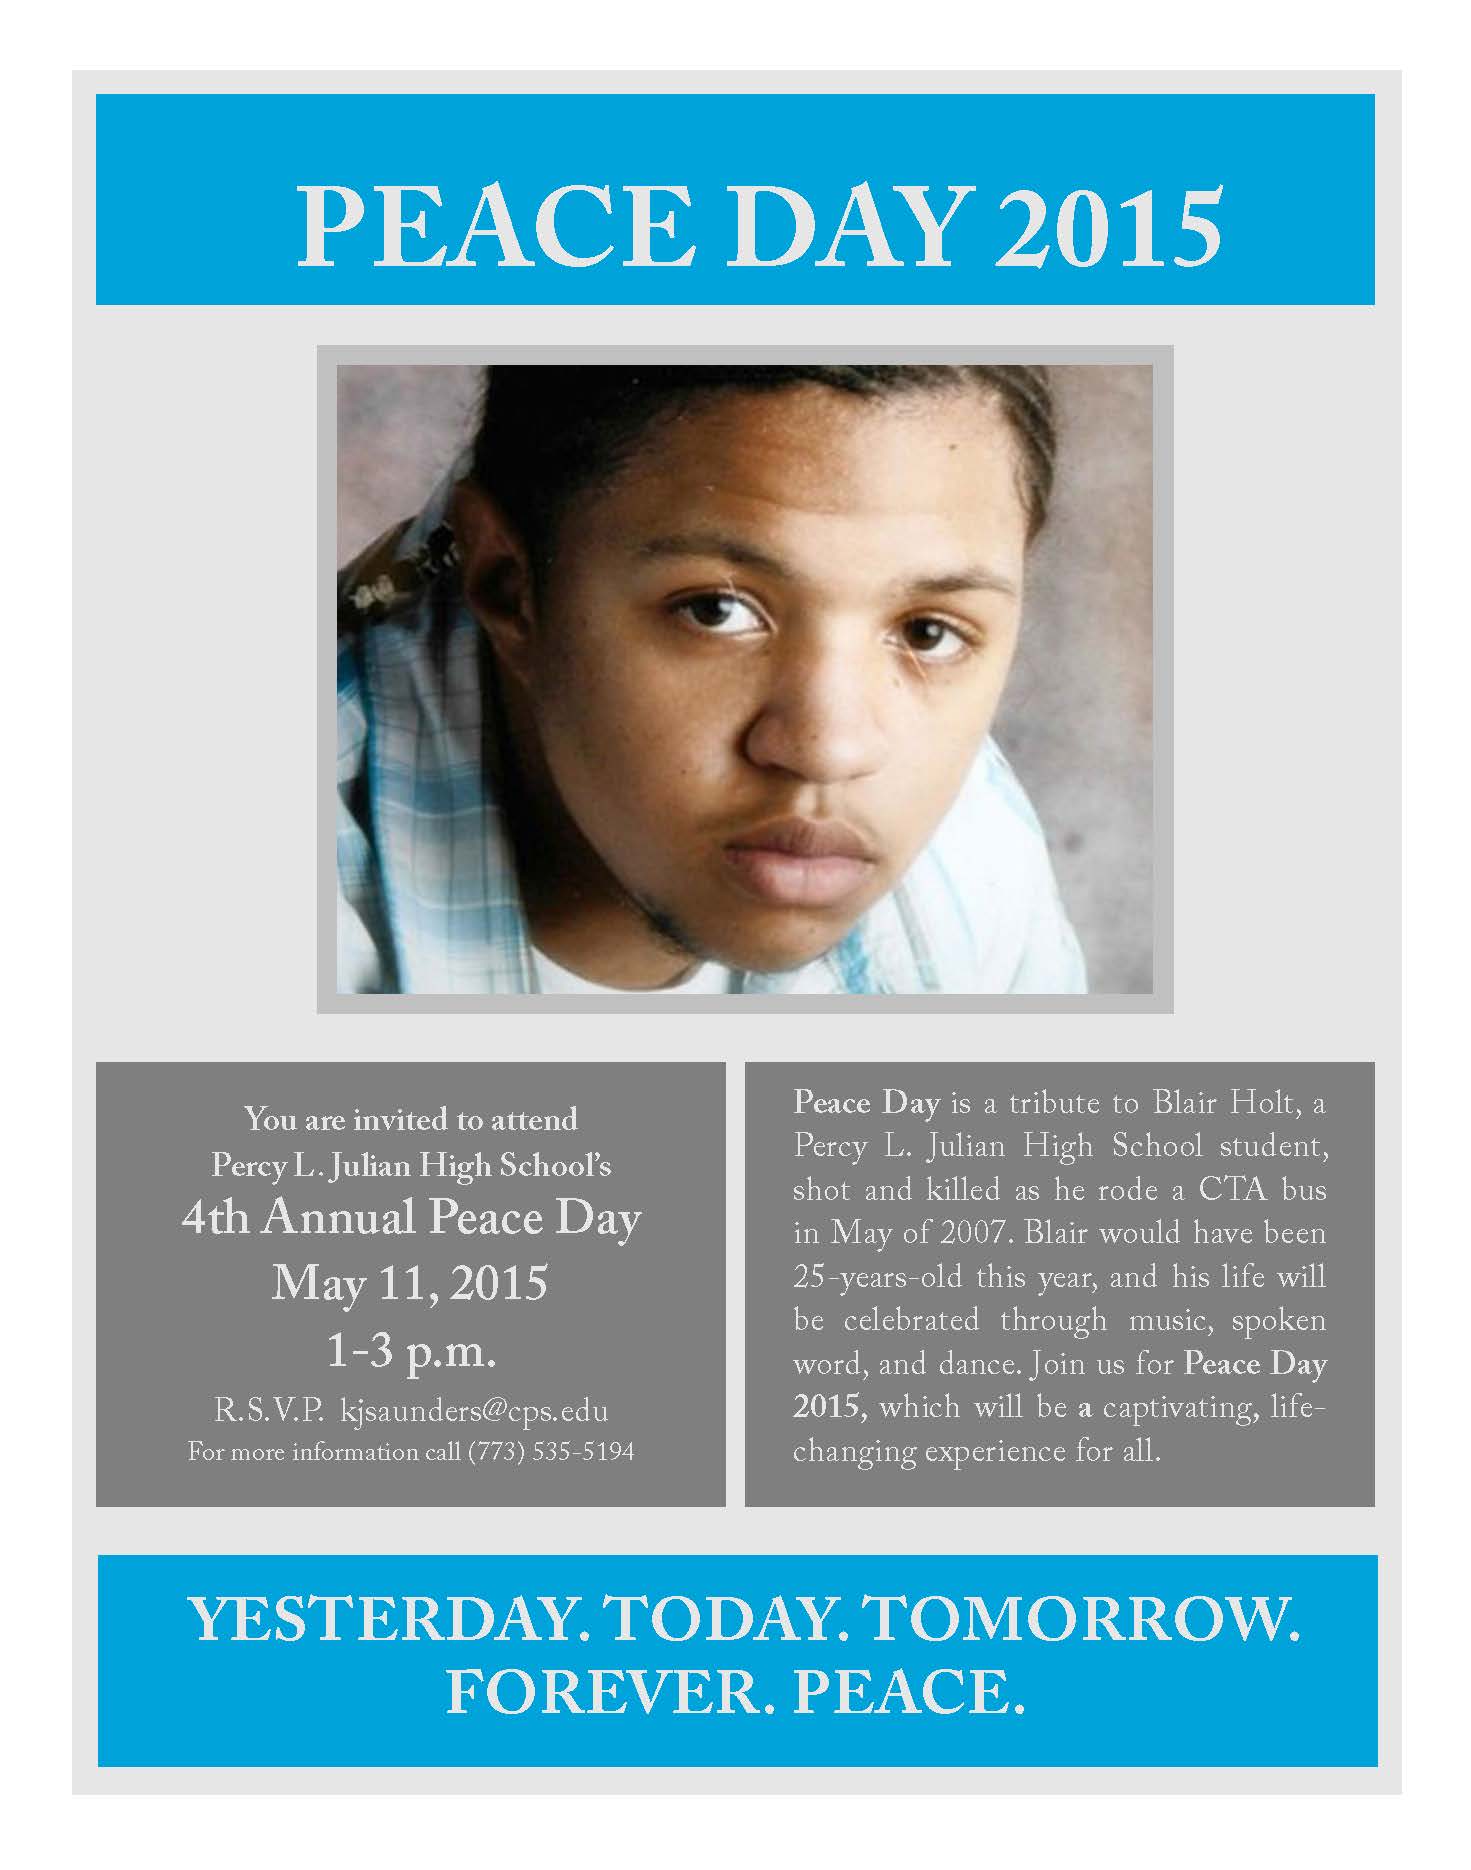 In honor of Blair Holt, a Percy L. Julian High School student, shot and killed as he rode a CTA bus in May of 2007.